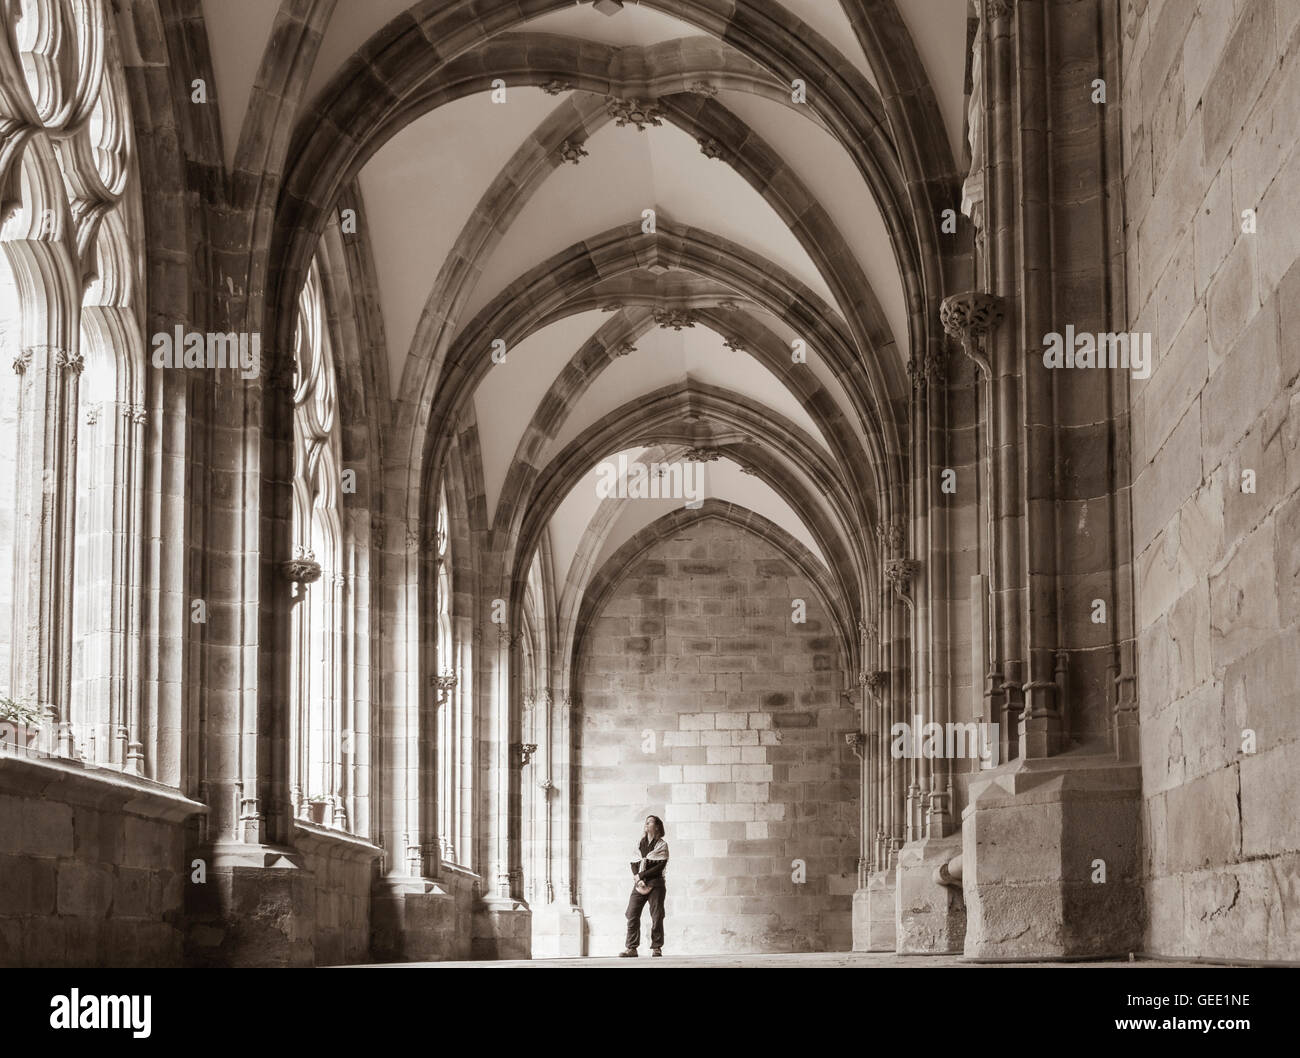 Cloister in Bilbao cathedral. Bilbao, Basque Country, Spain Stock Photo